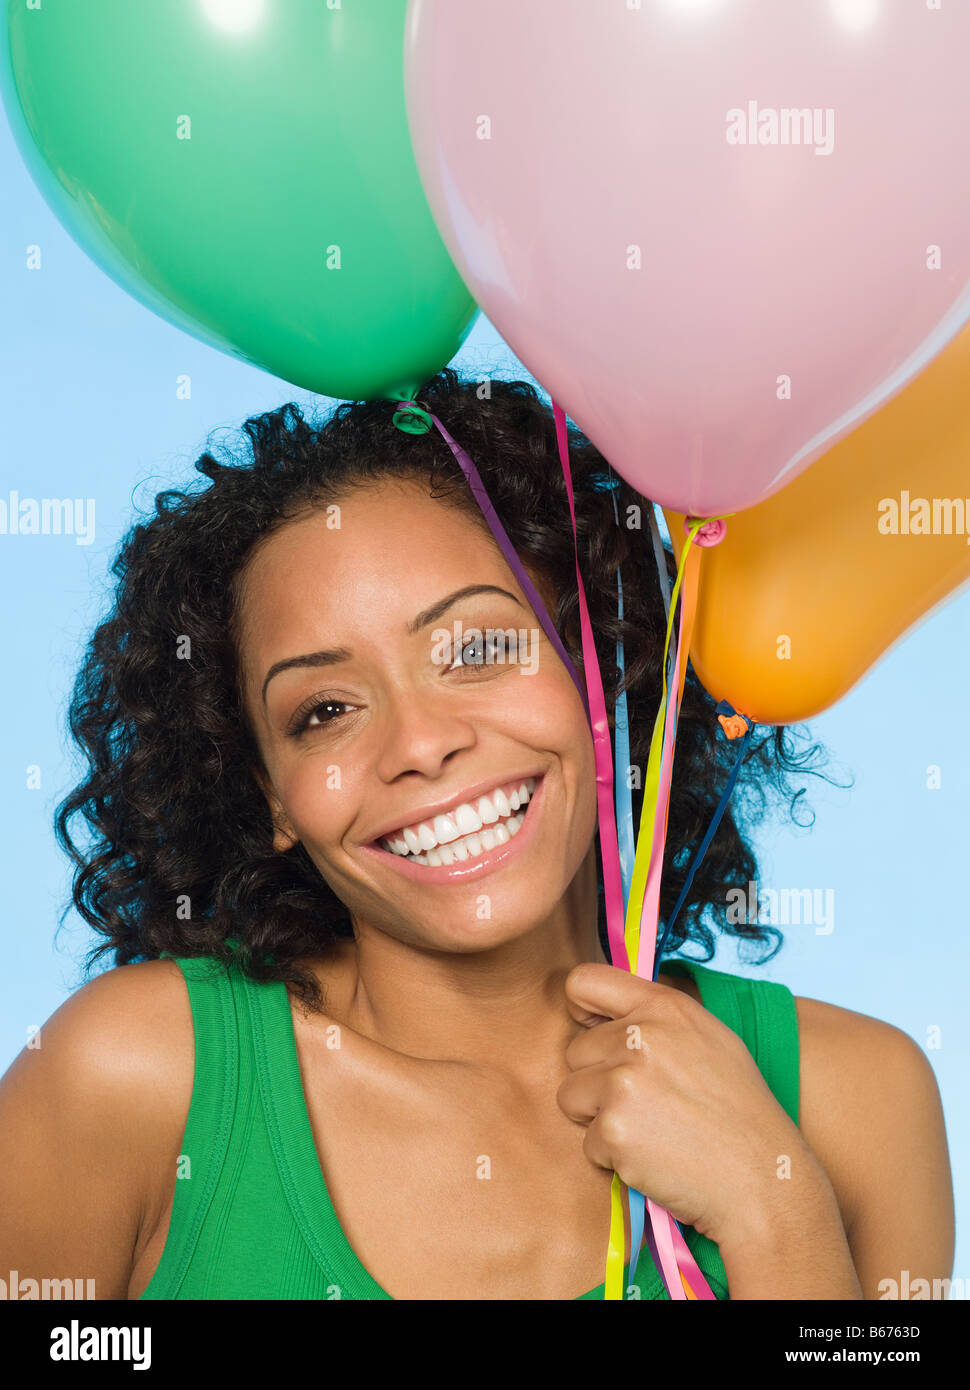 Young woman holding balloons Stock Photo